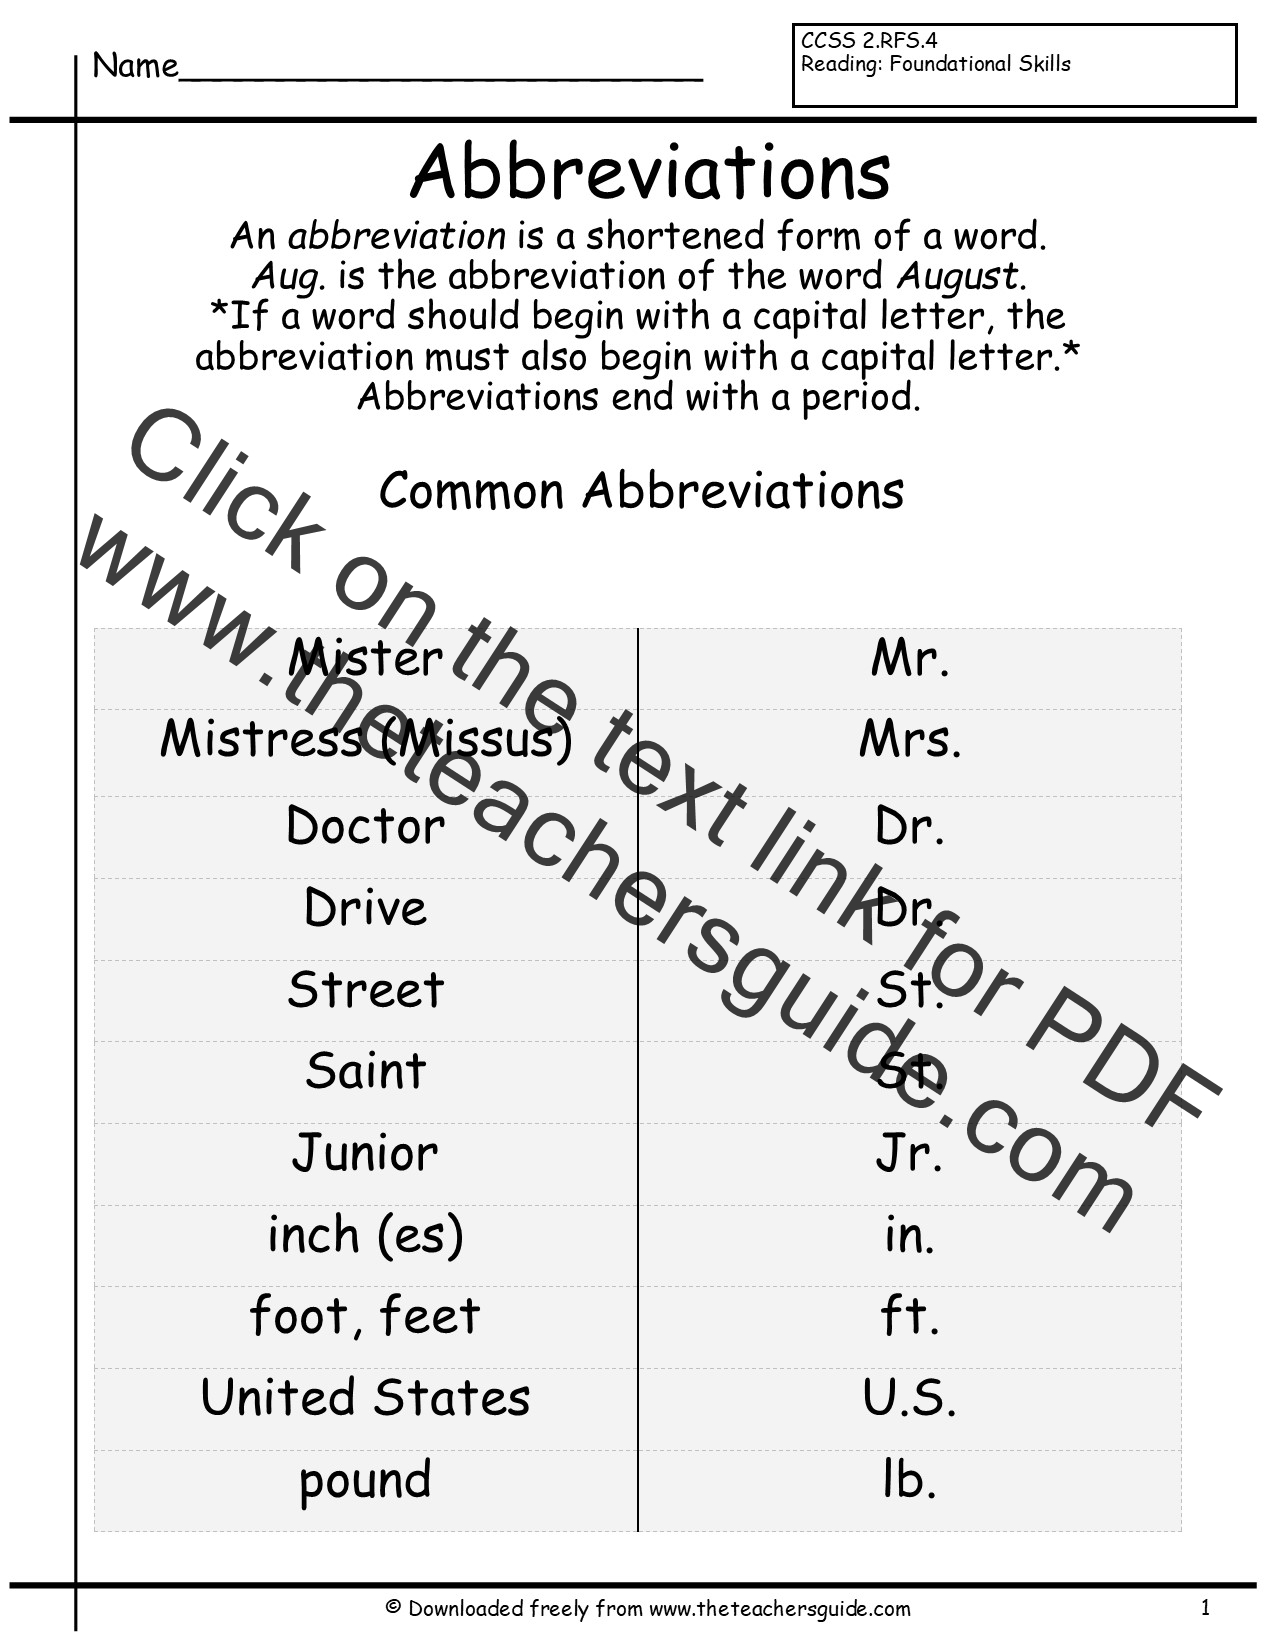 abbreviations-worksheets-from-the-teacher-s-guide